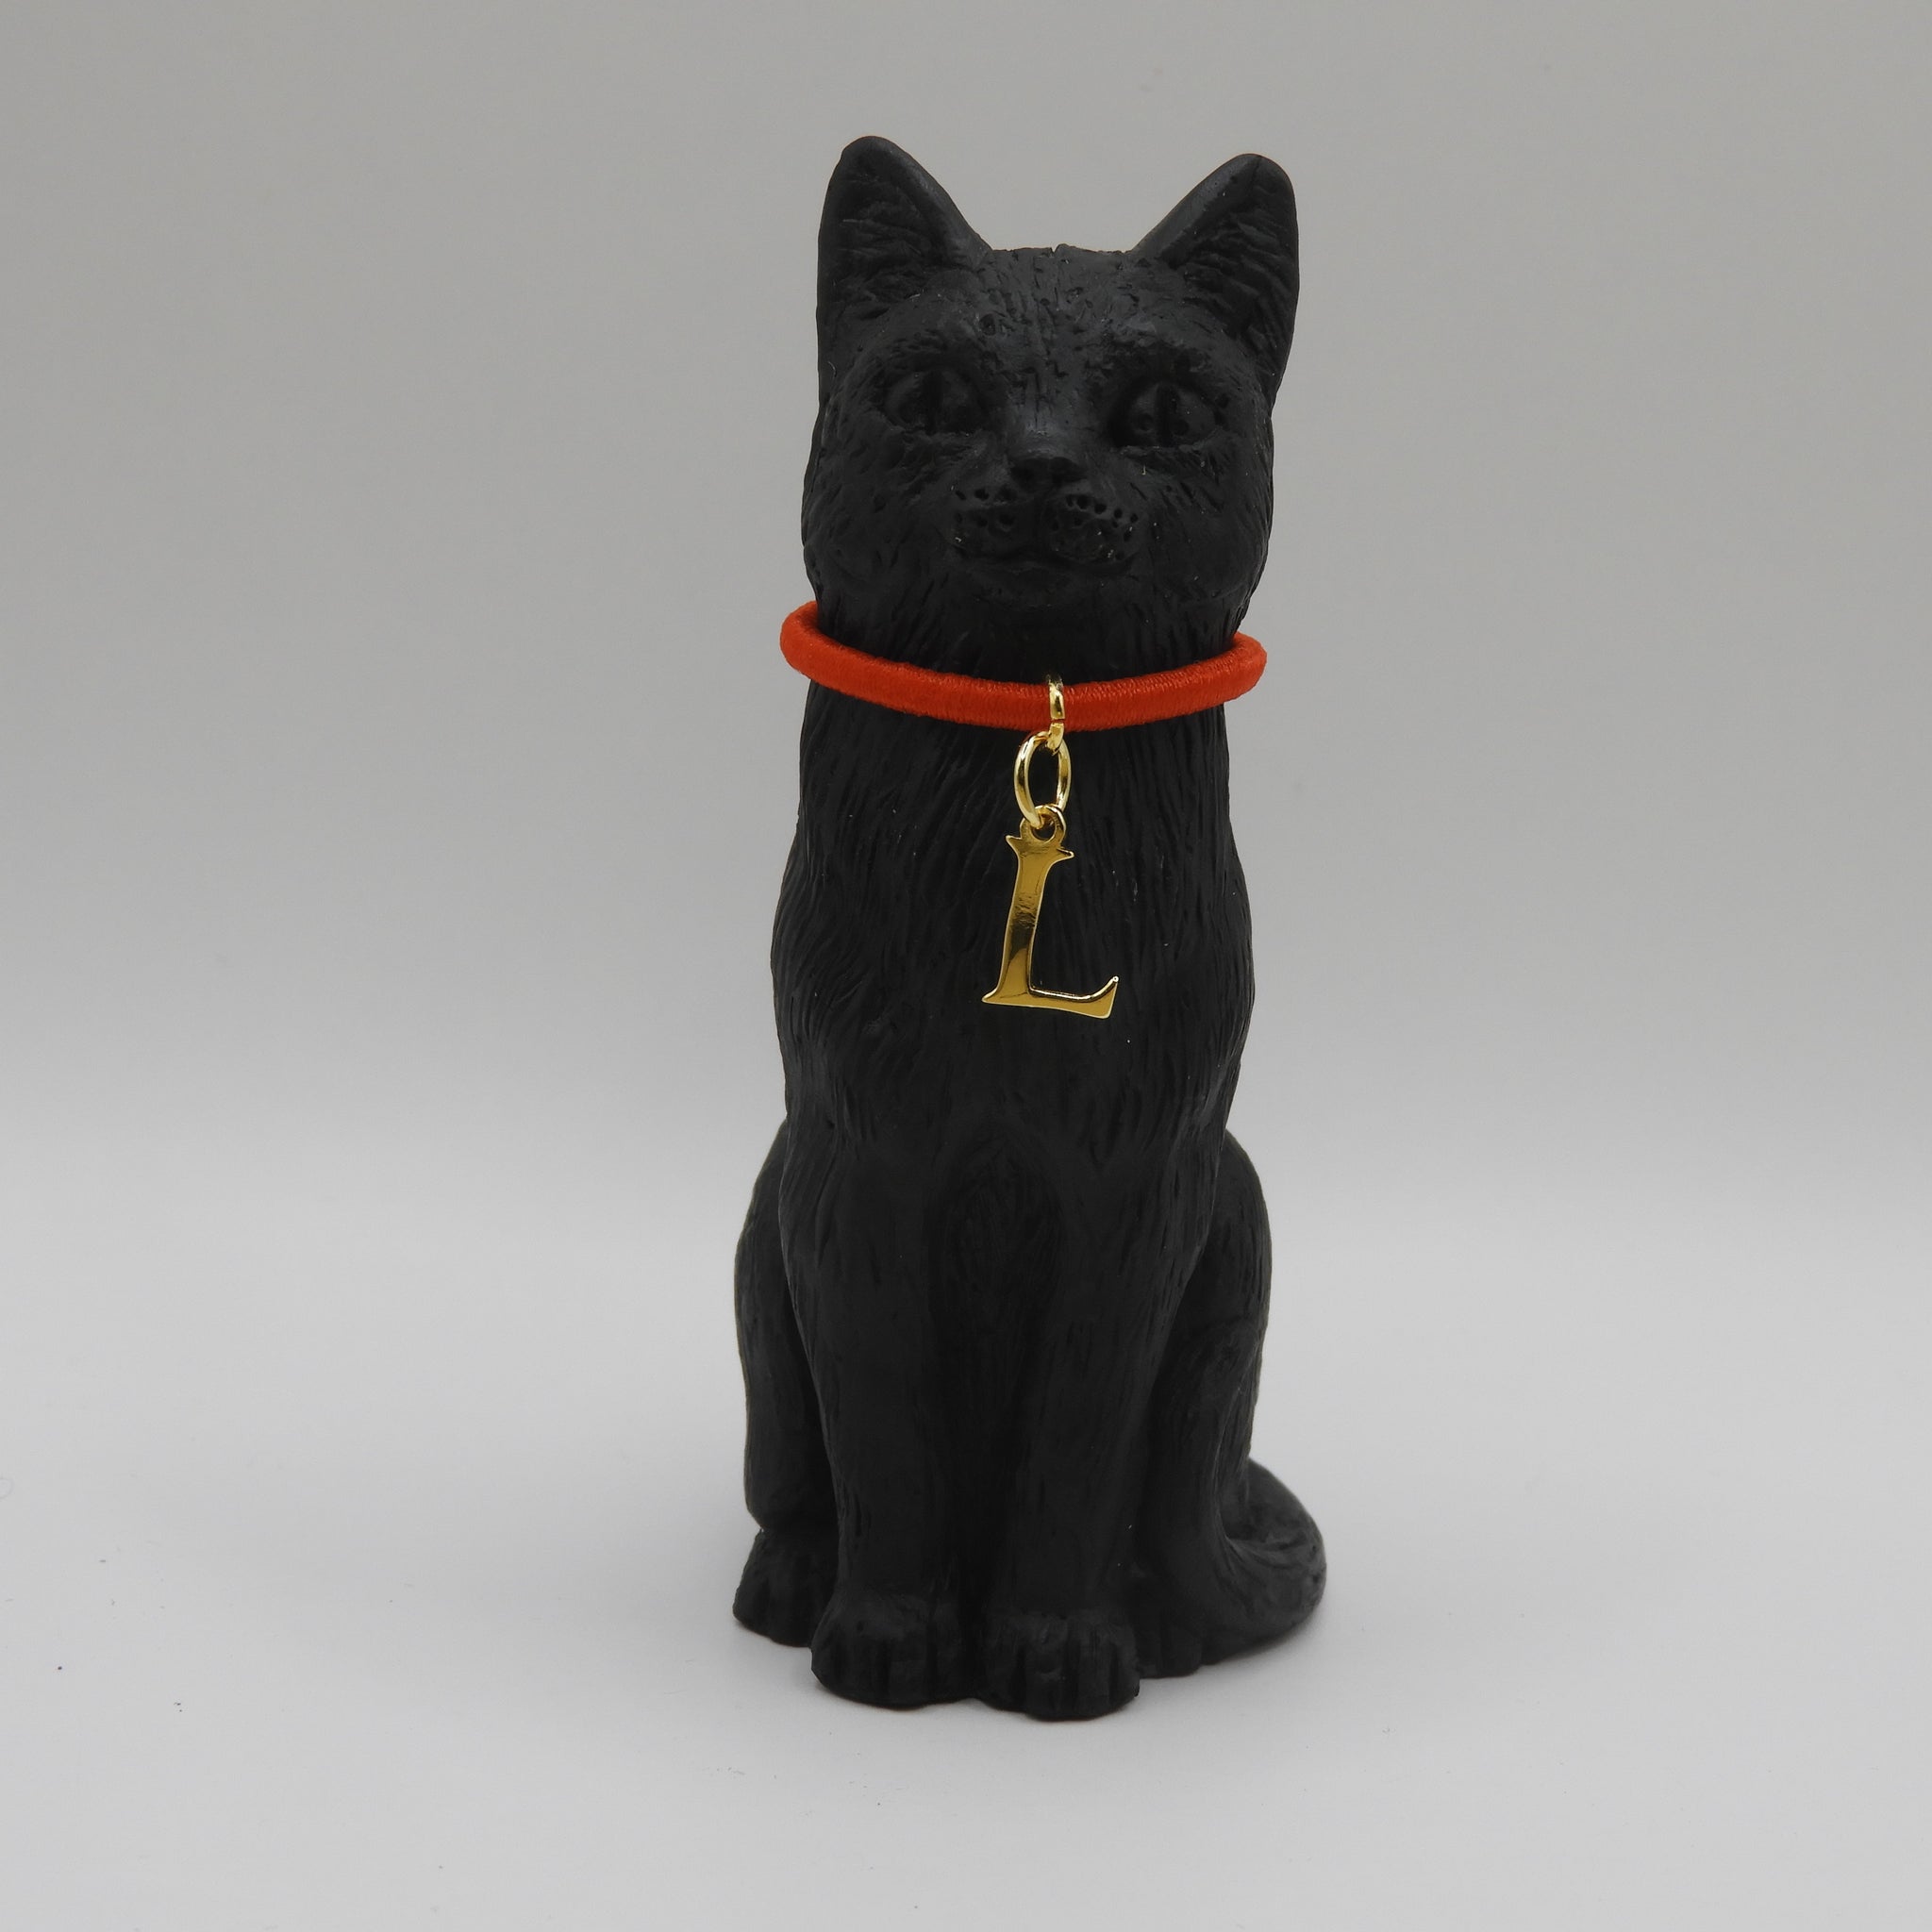 8cm Original Lucky Cat with Initial L Charm